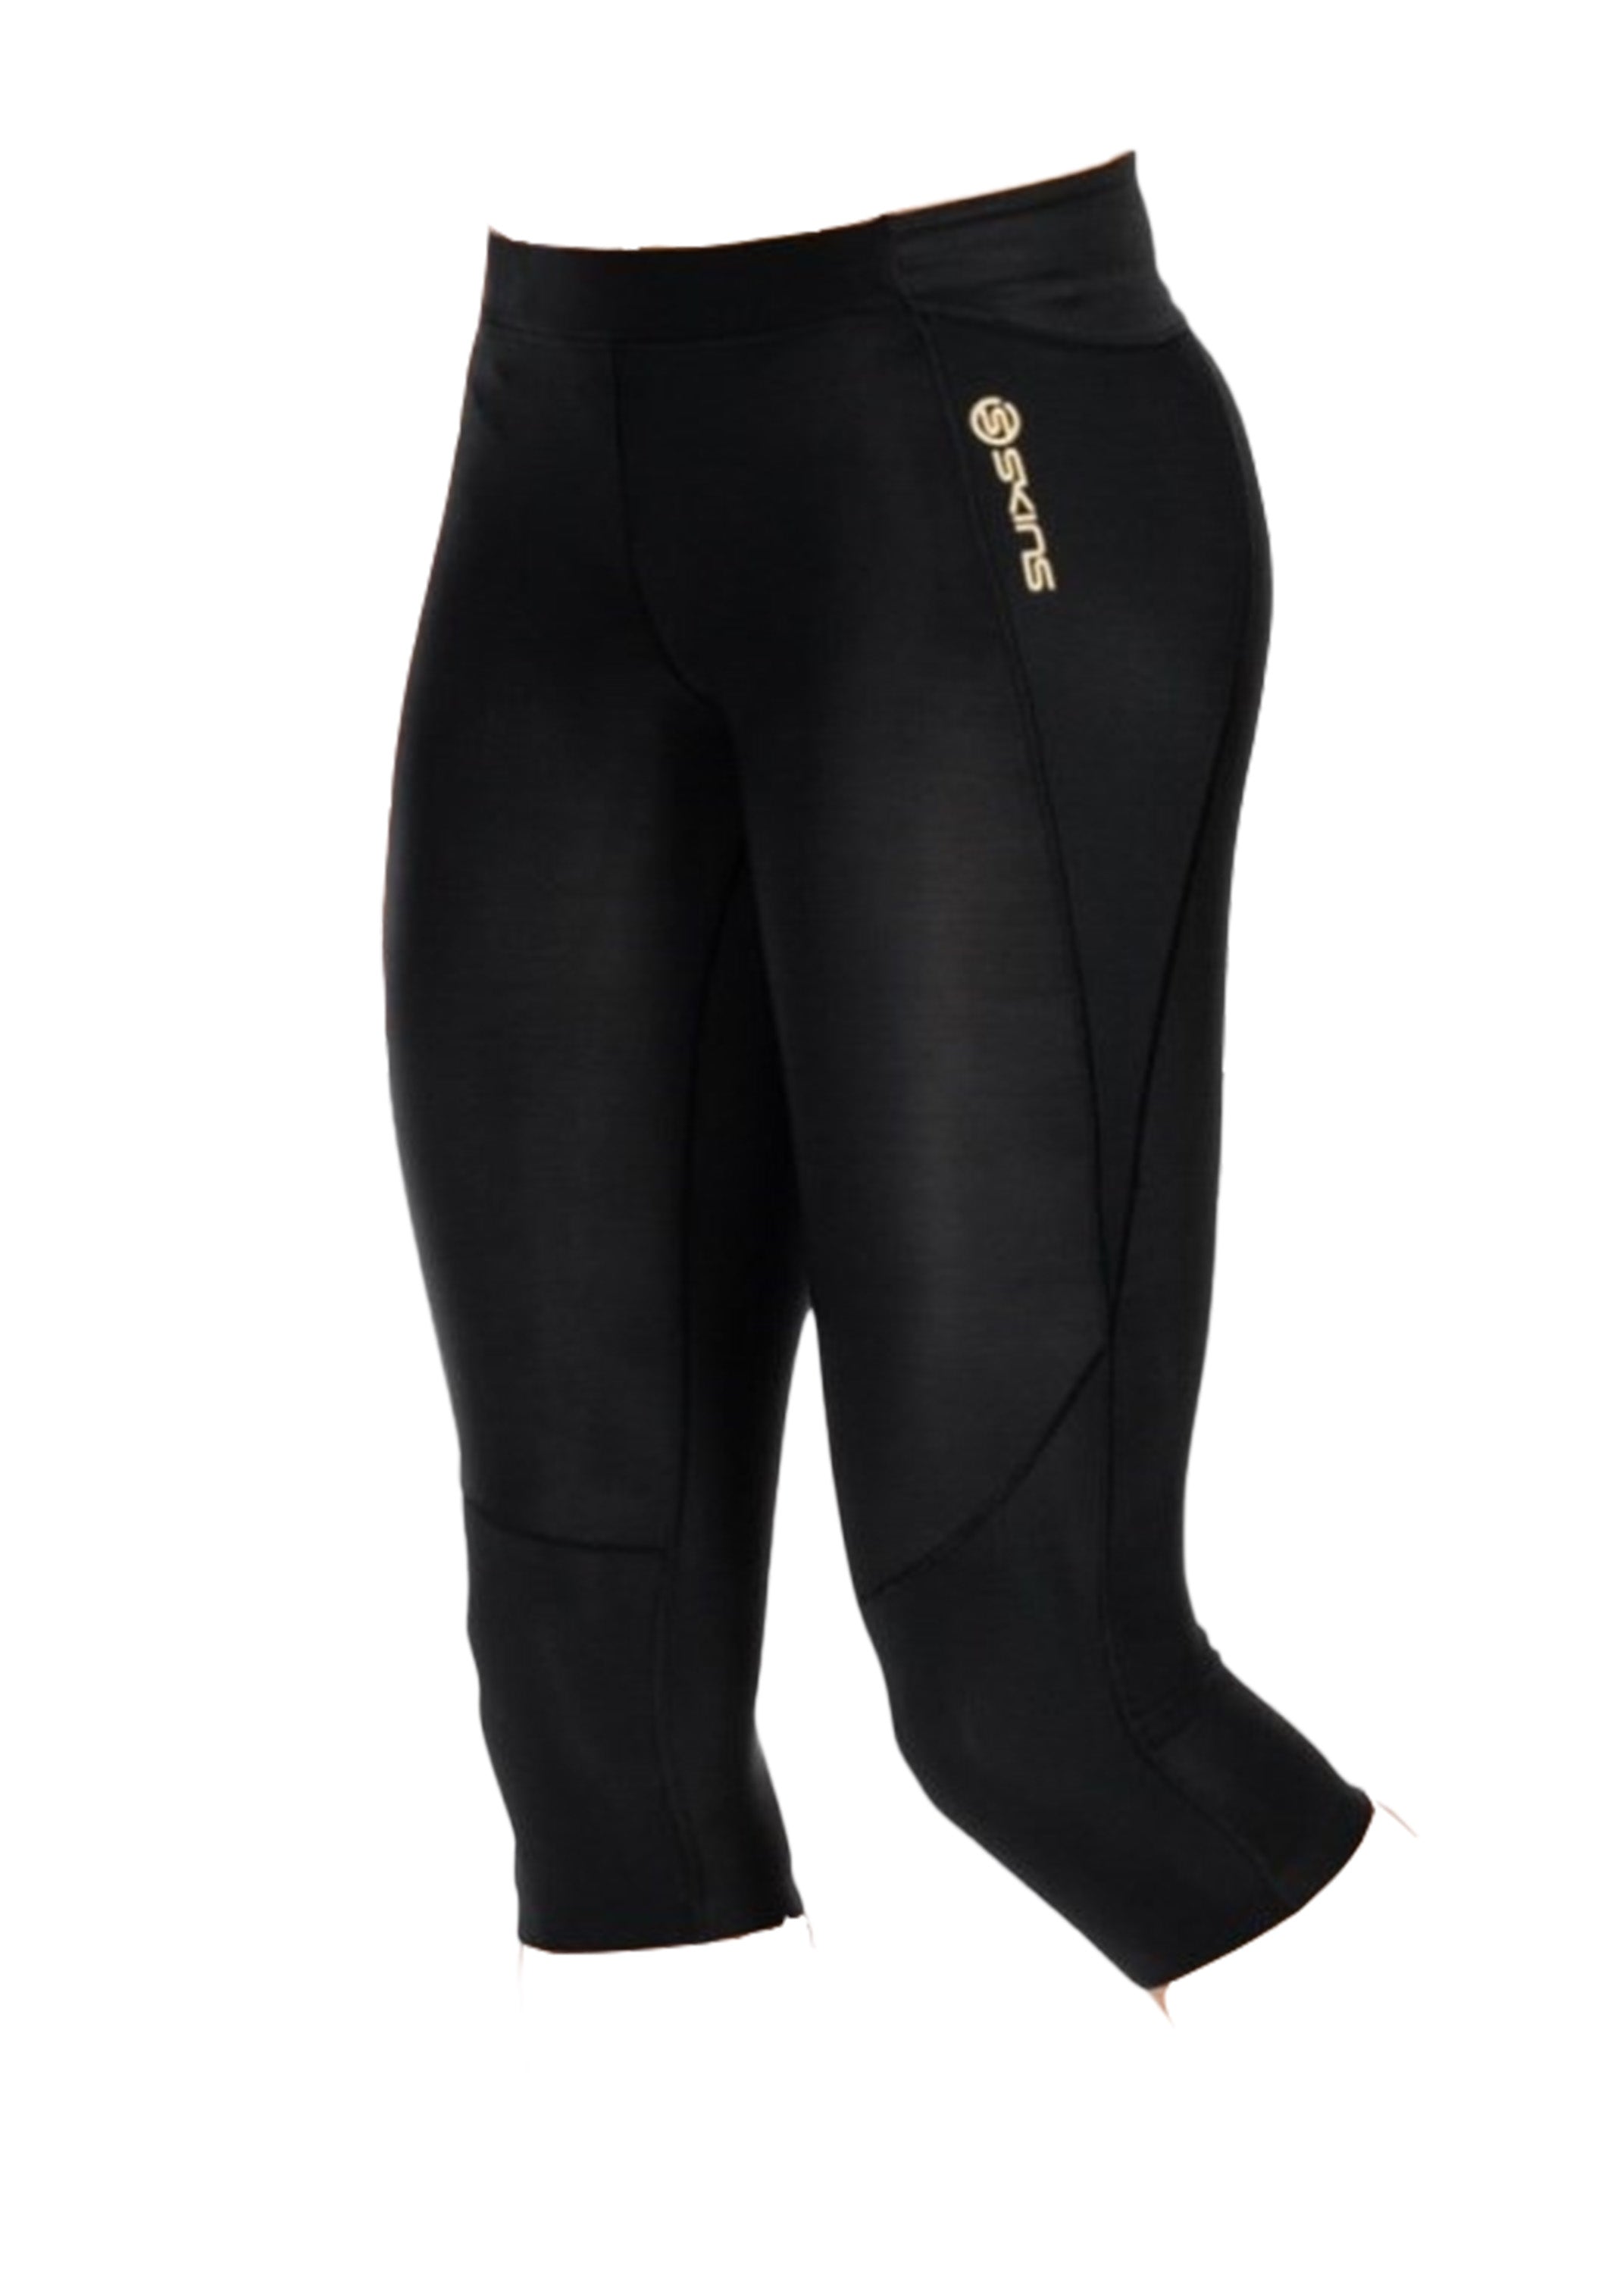 Skins A400 Womens Compression 3/4 Tights: Black/Gold